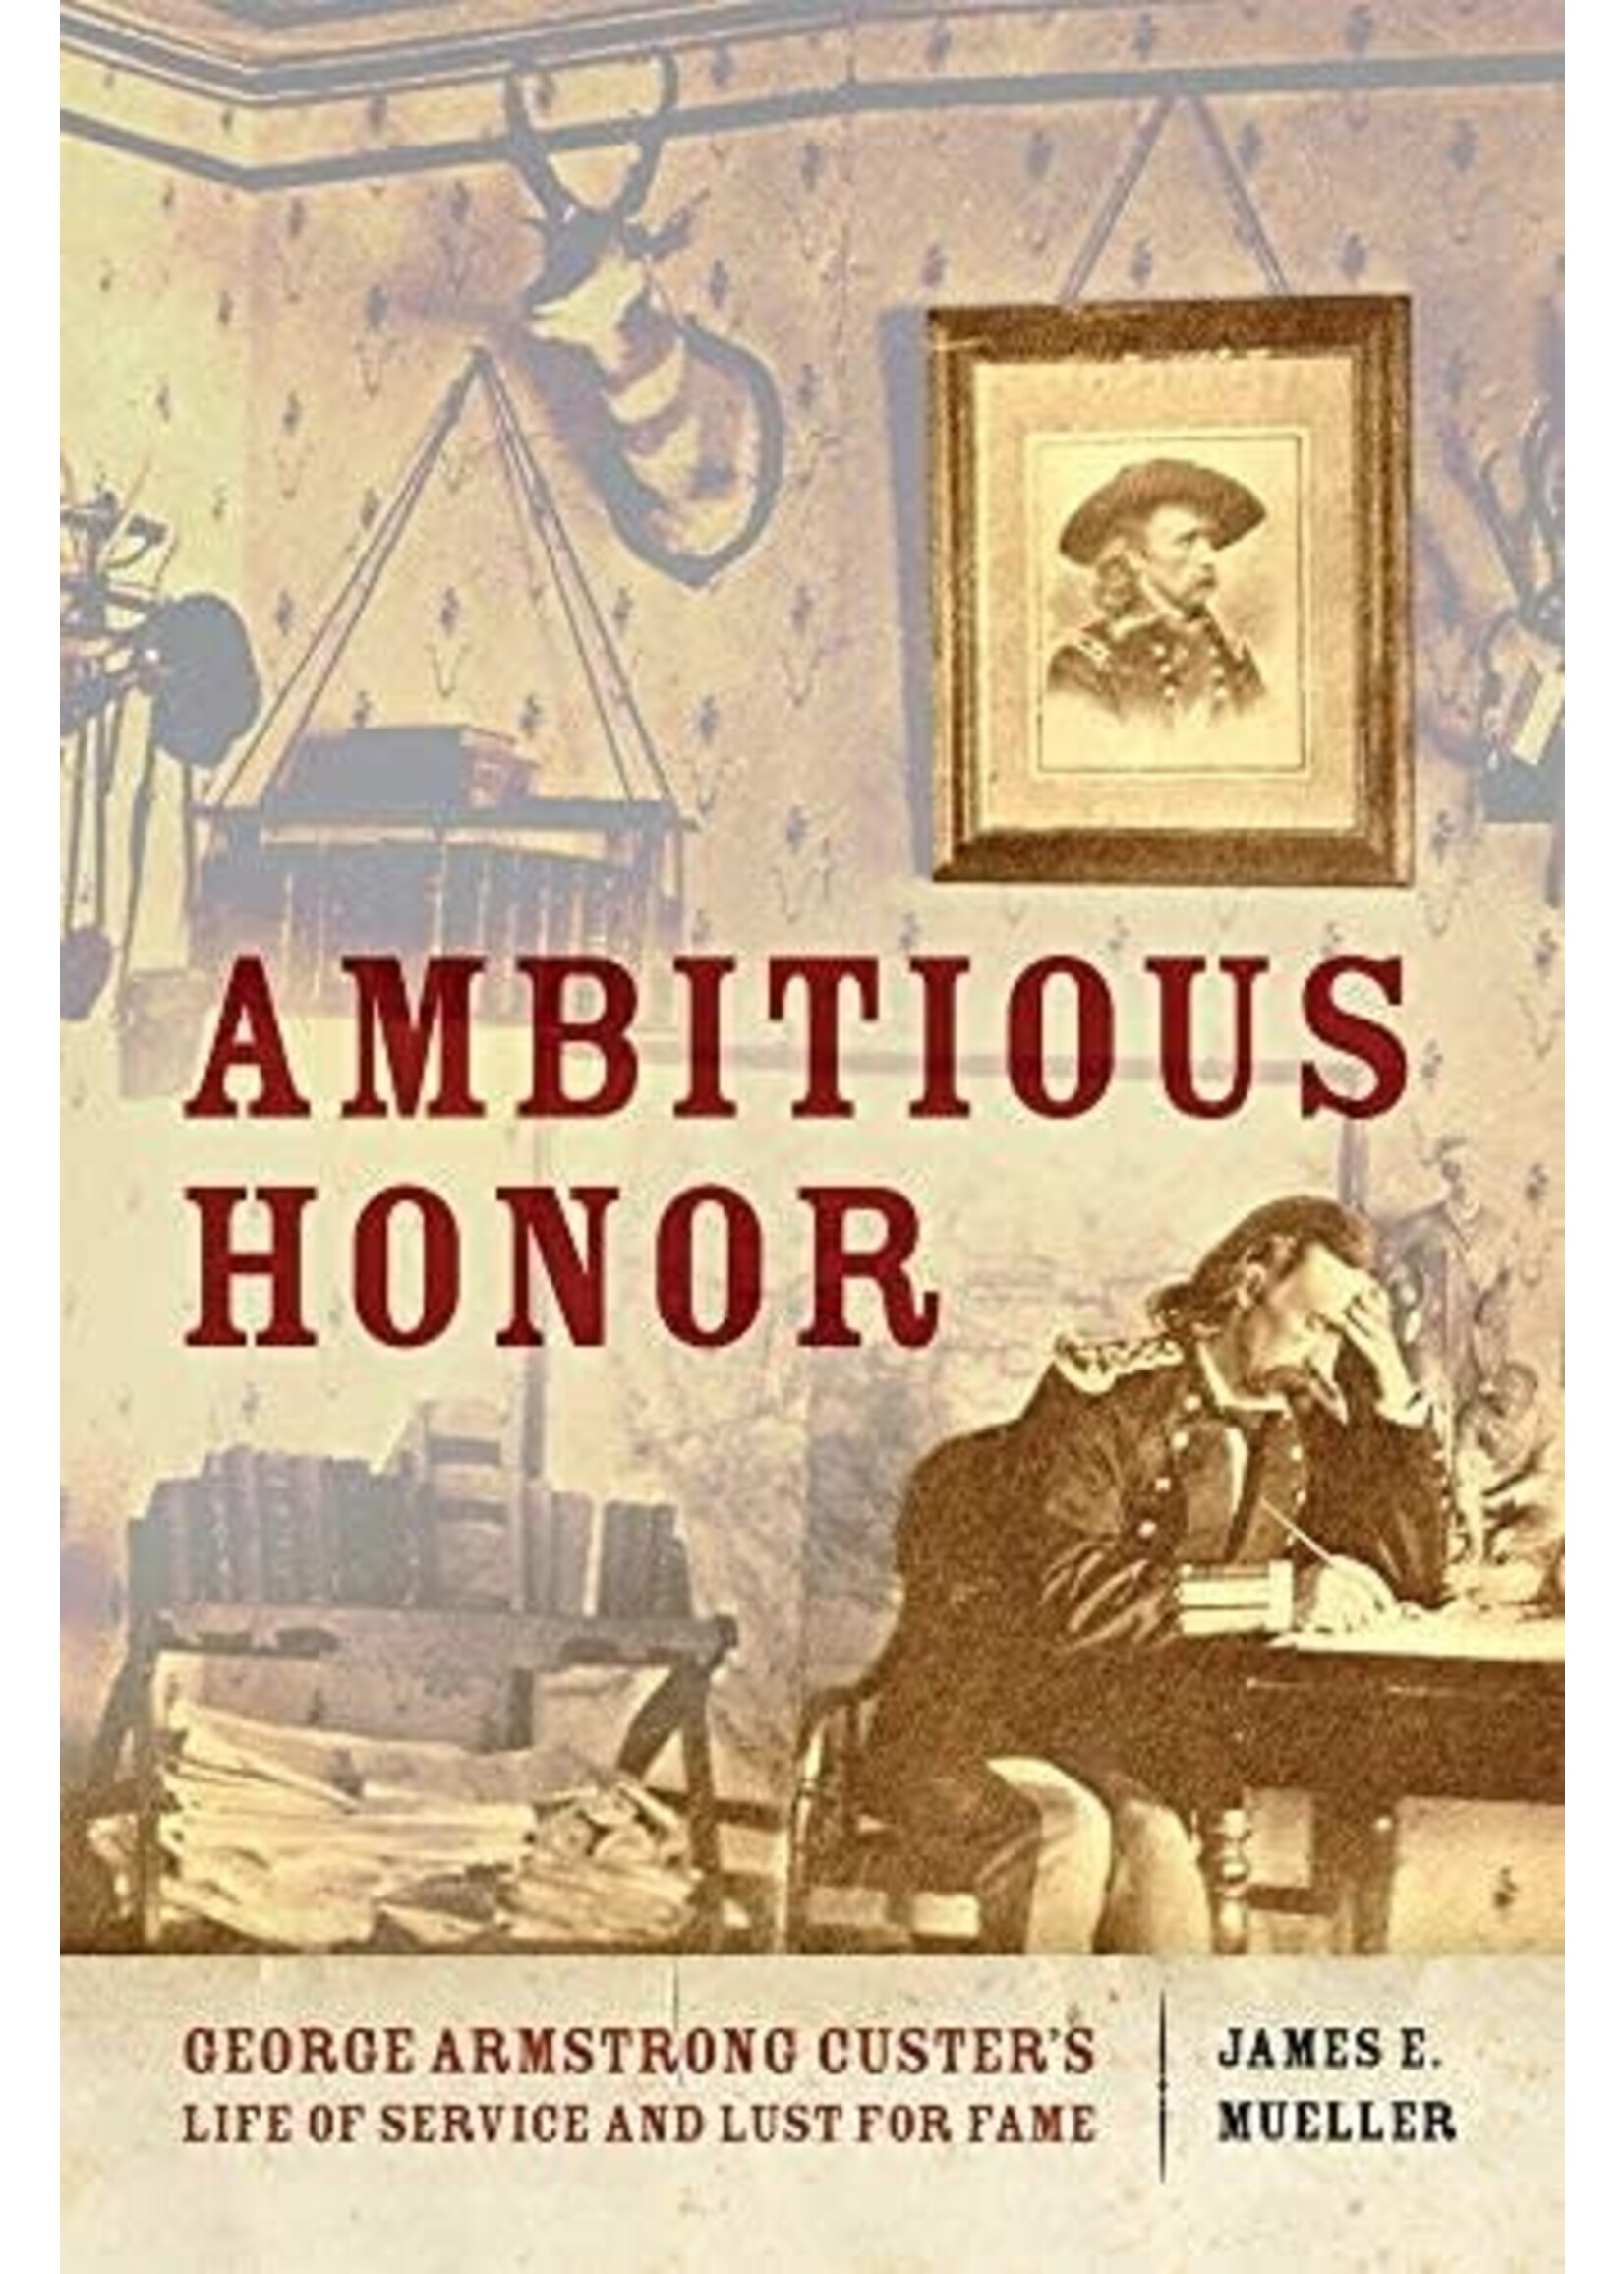 Ambitious Honor: George Armstrong Custer's Life of Service and Lust for Fame